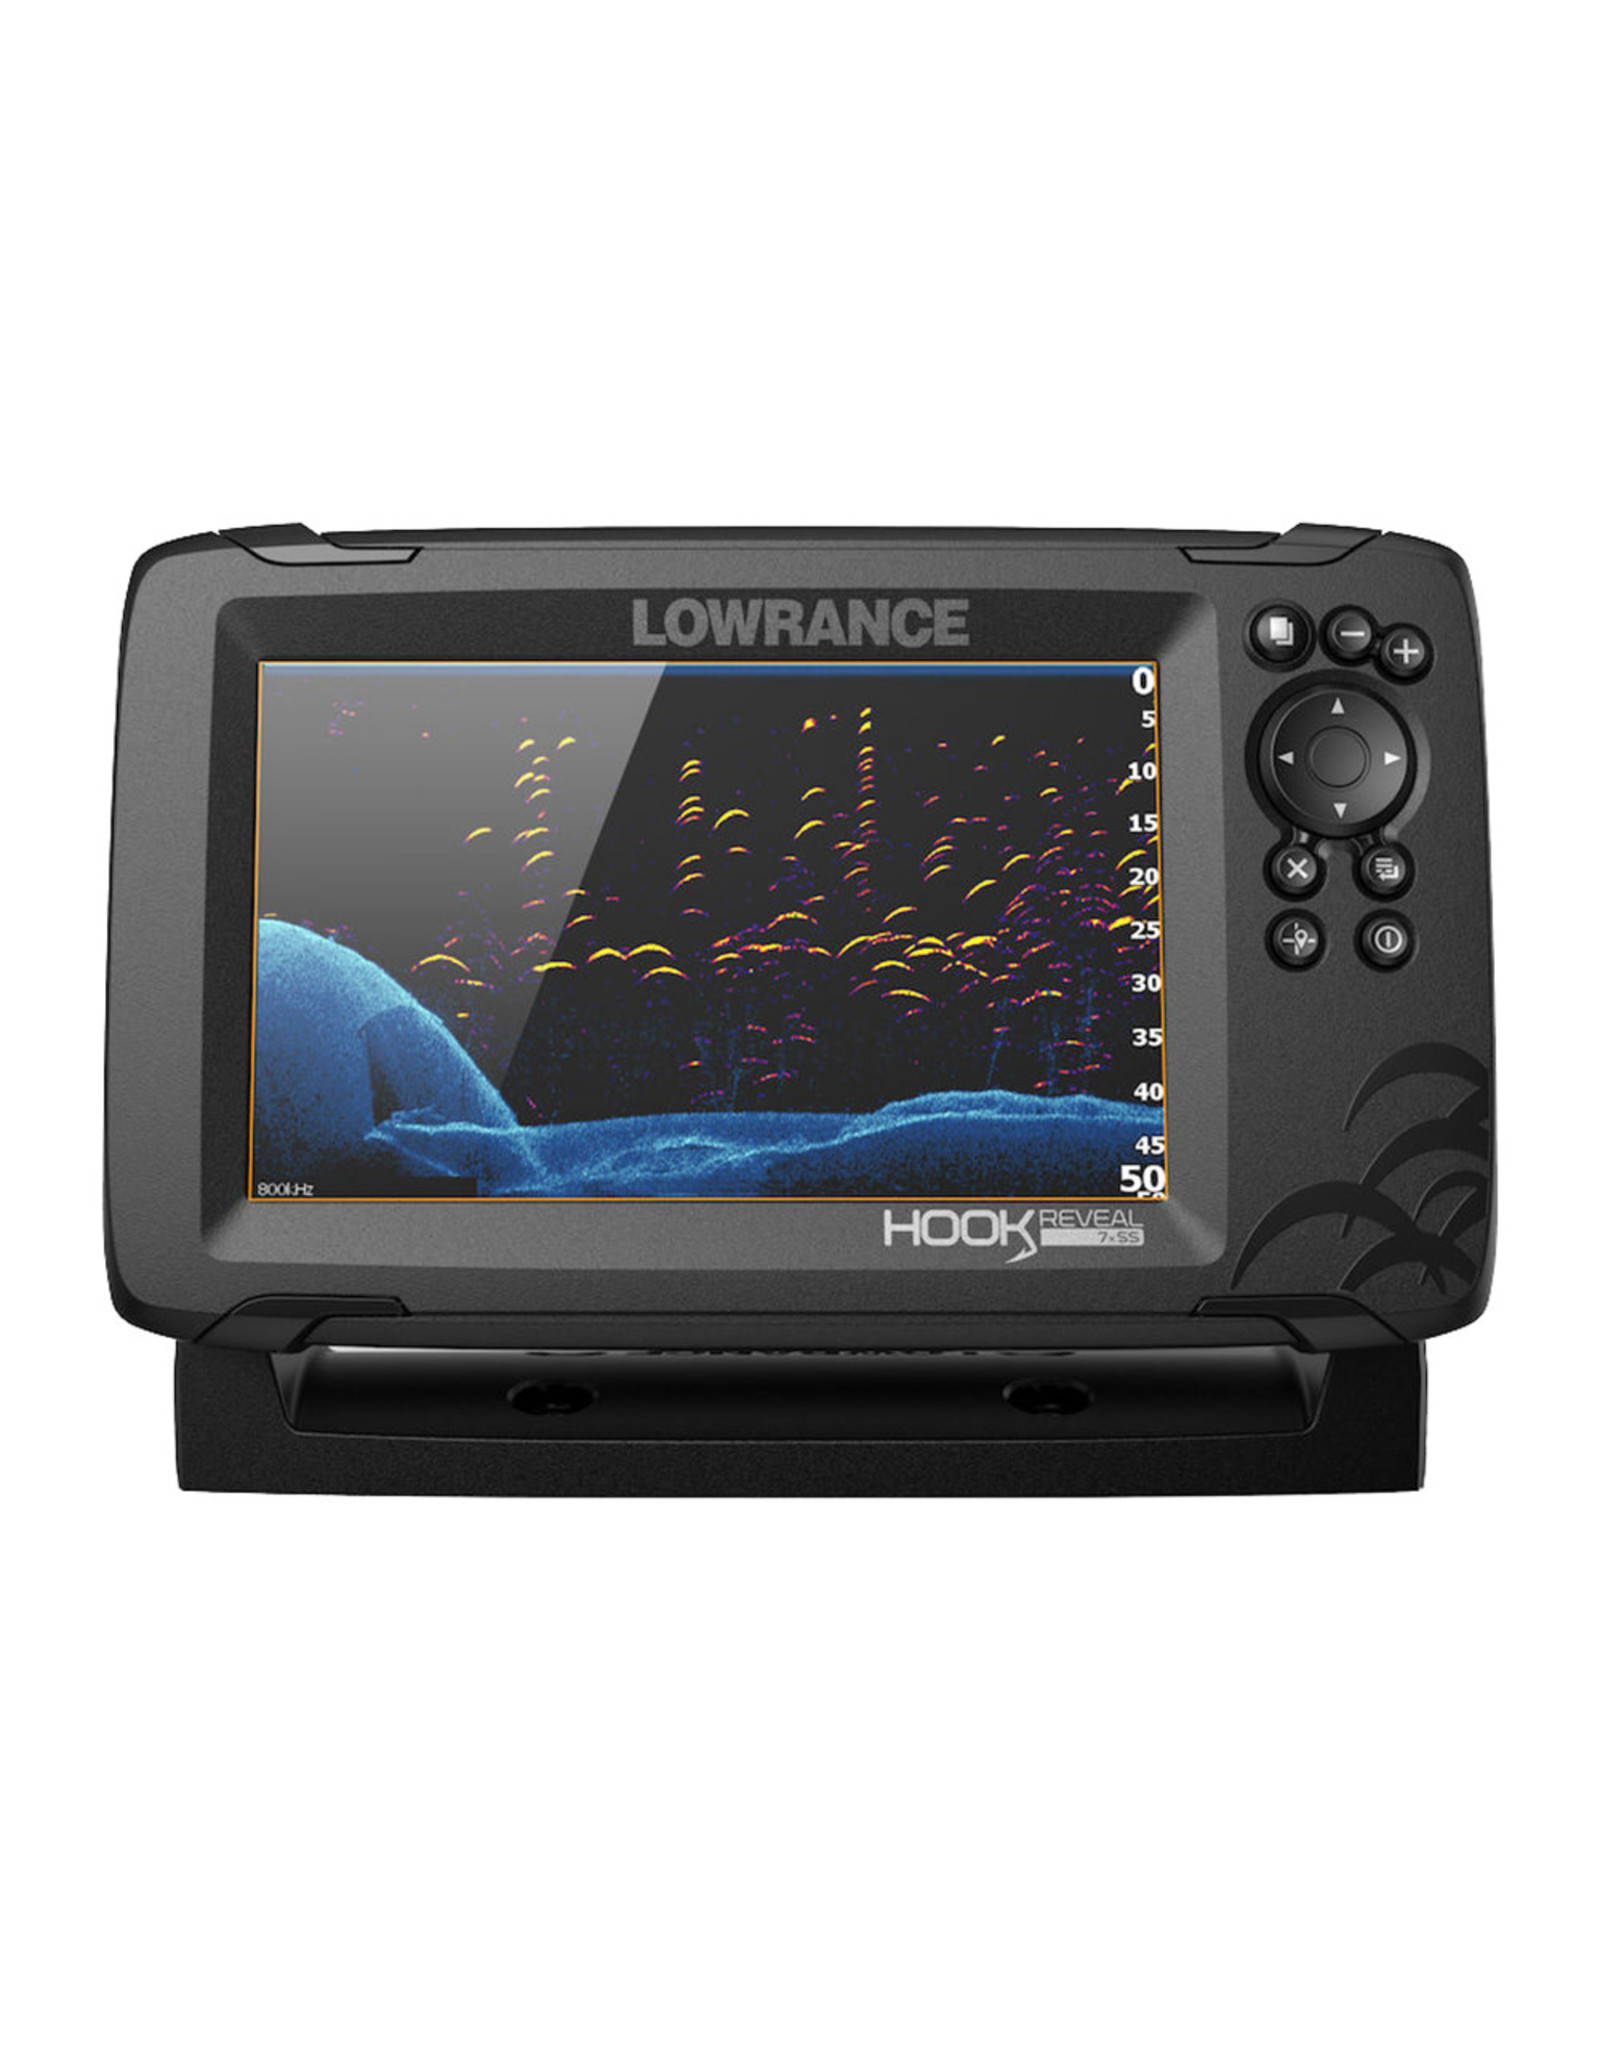 Lowrance HOOK Reveal 7x Fishfinder with TripleShot Transducer with Built-In GPS Trackplotter